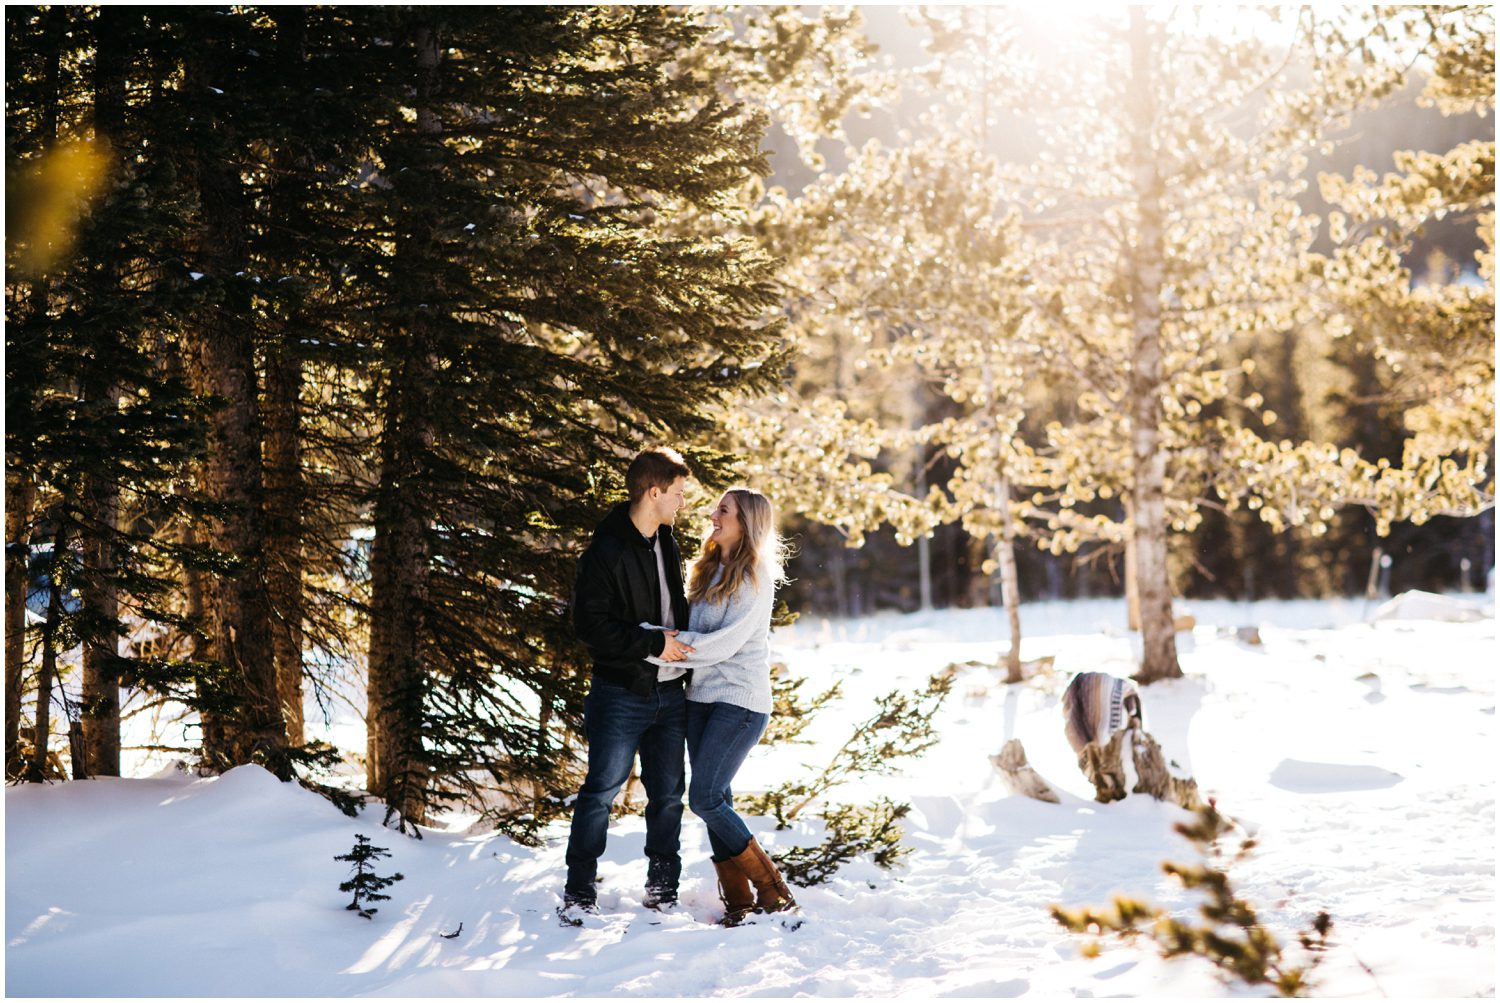 Engagement Session at Brainard Lake in Boulder Colorado, Boulder Colorado Photographer, Boulder Wedding Photographer, Boulder engagement photographer, Boulder engagement photos, Engagement session locations in Boulder, Colorado winter engagement session, Winter engagement photos, Mountain engagement session, Snowy engagement photos, Engagement photos with dogs, Save the date, Save the data photo ideas, Photo session with dogs, St Bernard, Brainard Lake, Colorado, Boulder Colorado, Nederland Colorado, Ward Colorado, Colorado wedding, Colorado photographer